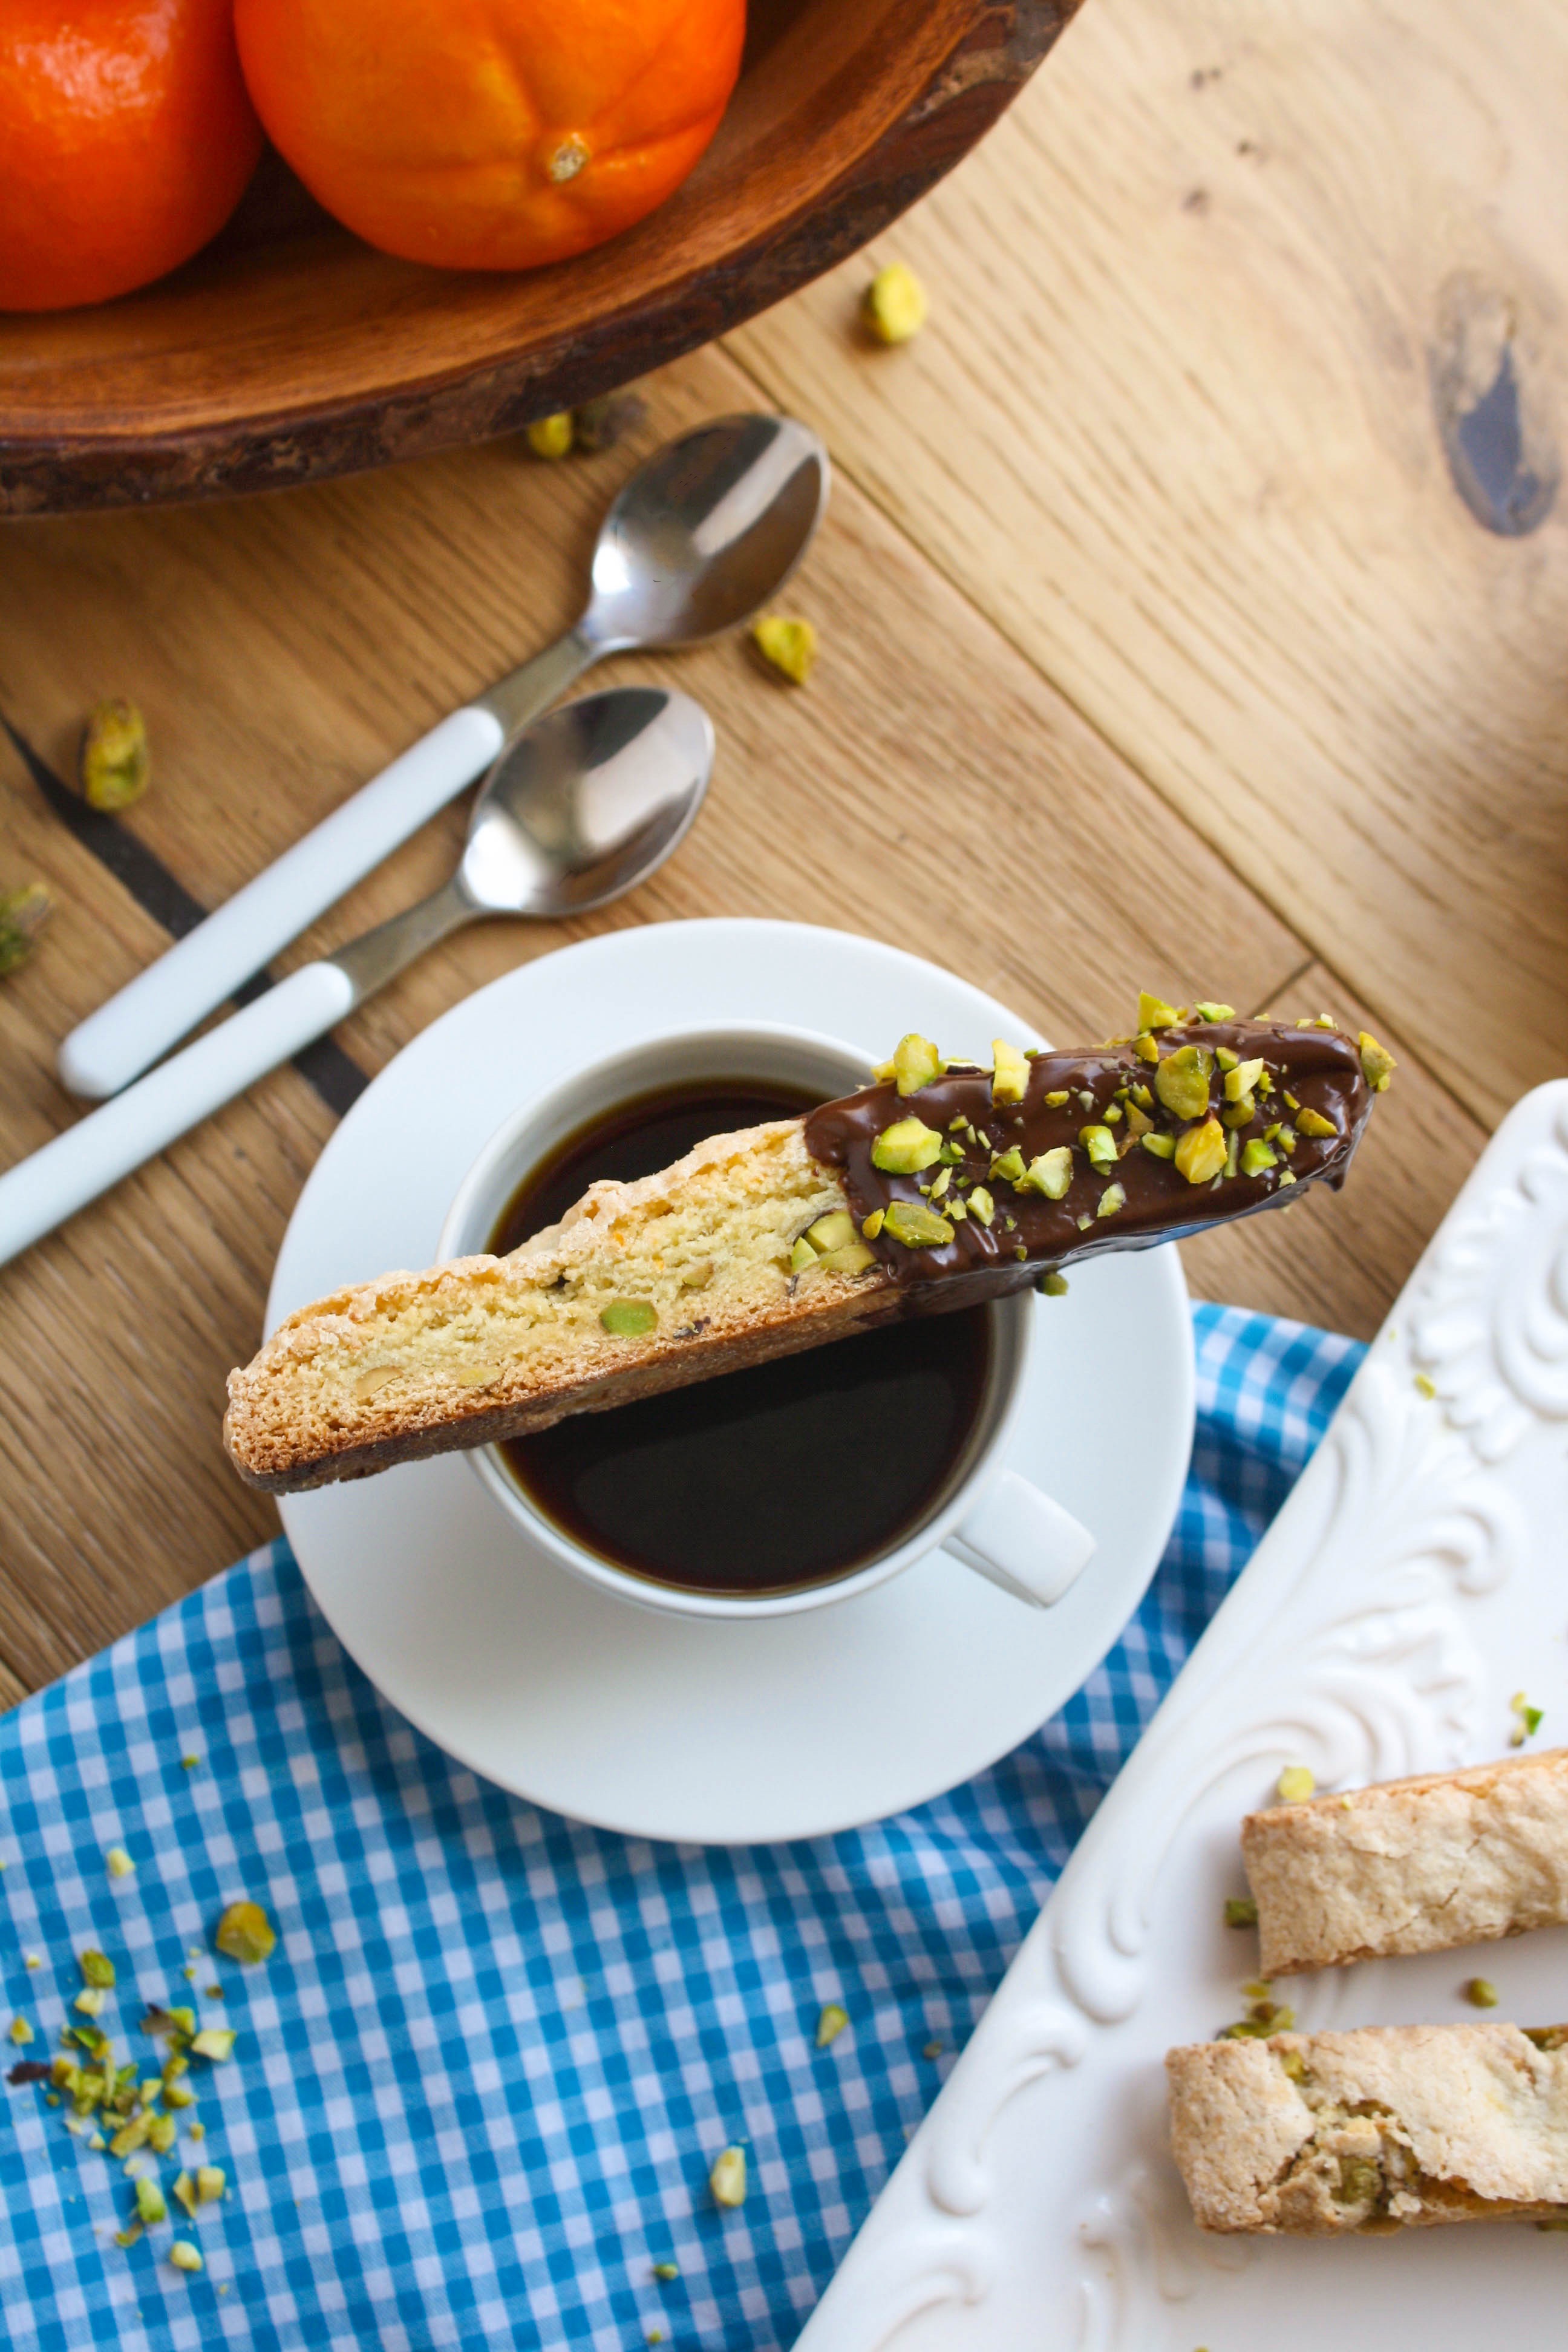 Chocolate-Espresso Dipped Orange and Pistachio Biscotti are tasty cookies you'll love to serve. These cookies make a fine dessert!